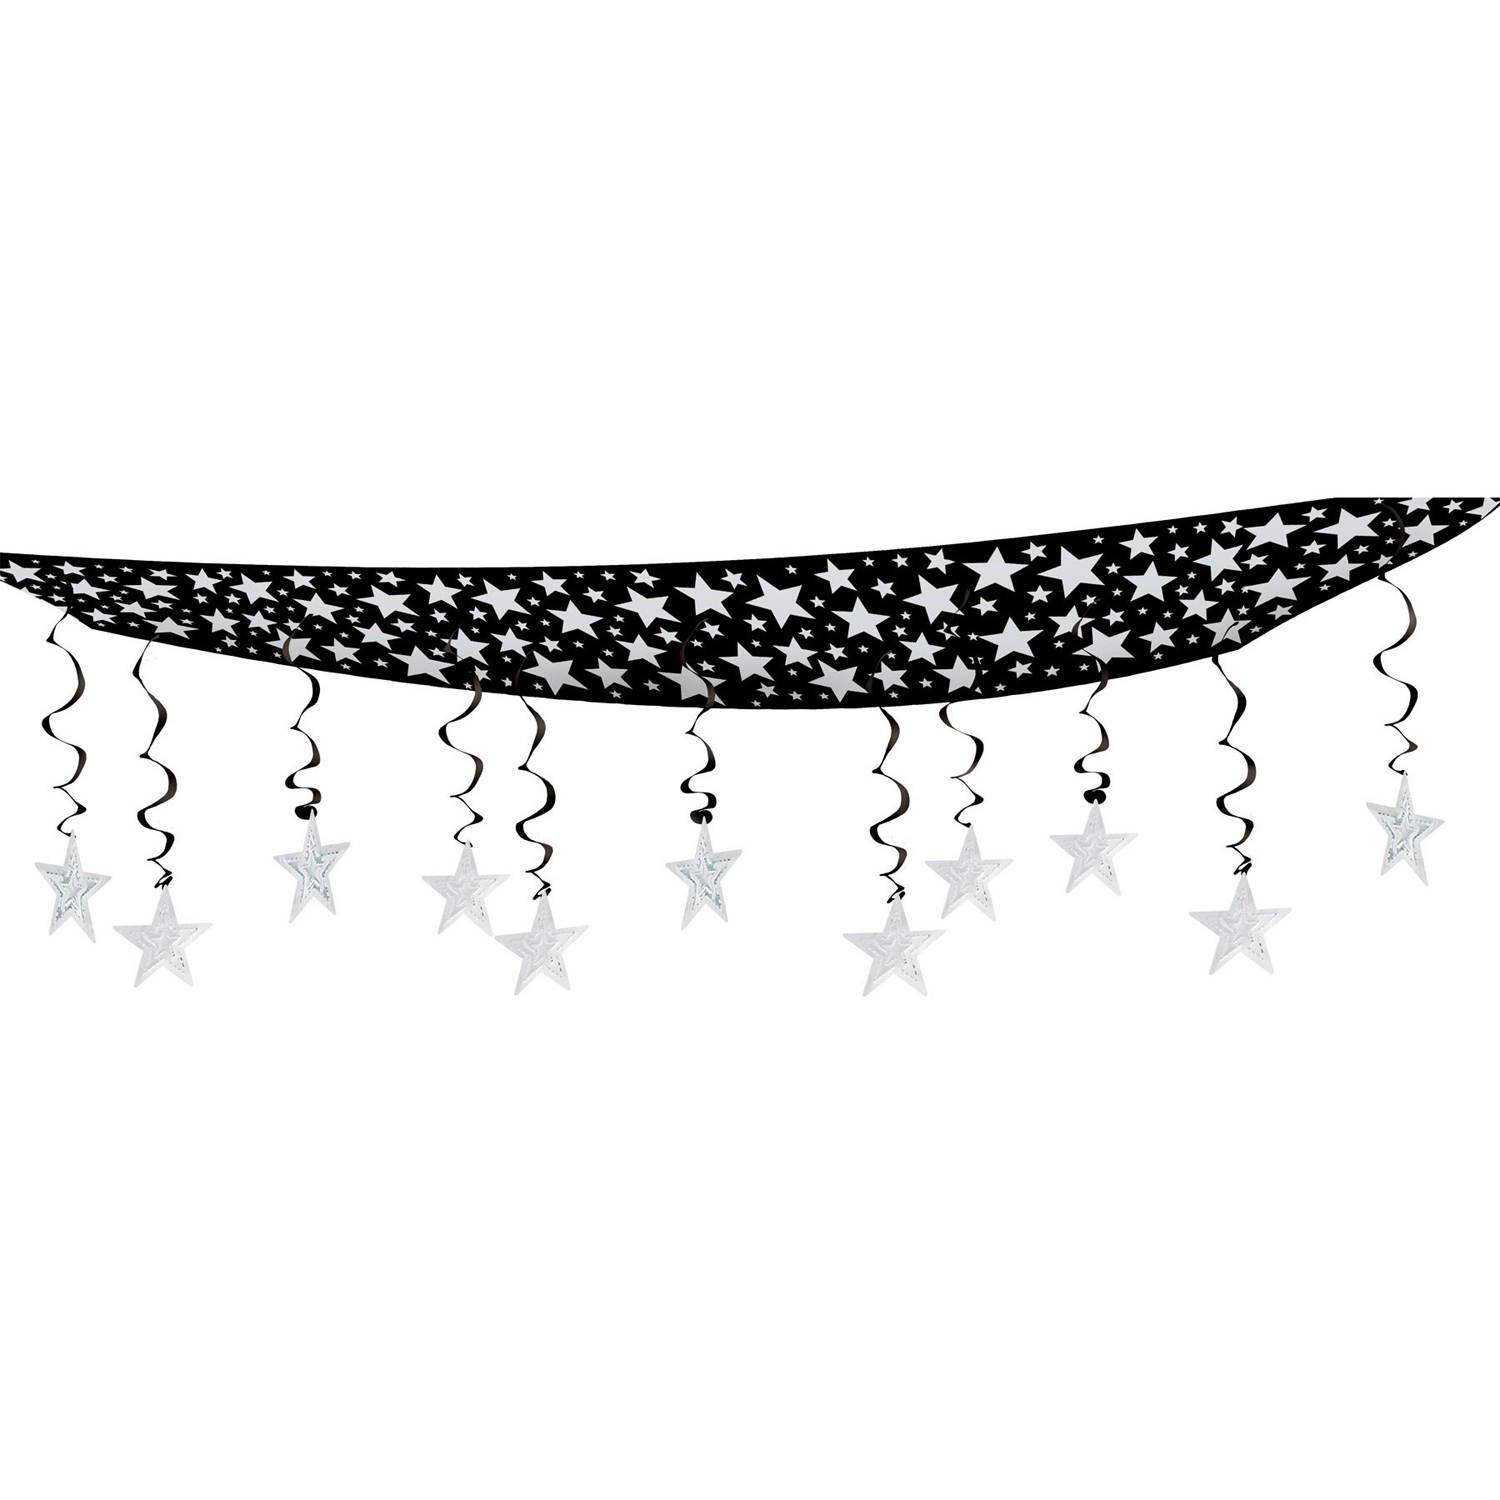 Hanging black ceiling decor with silver stars and black dangling whirls with silver stars. 